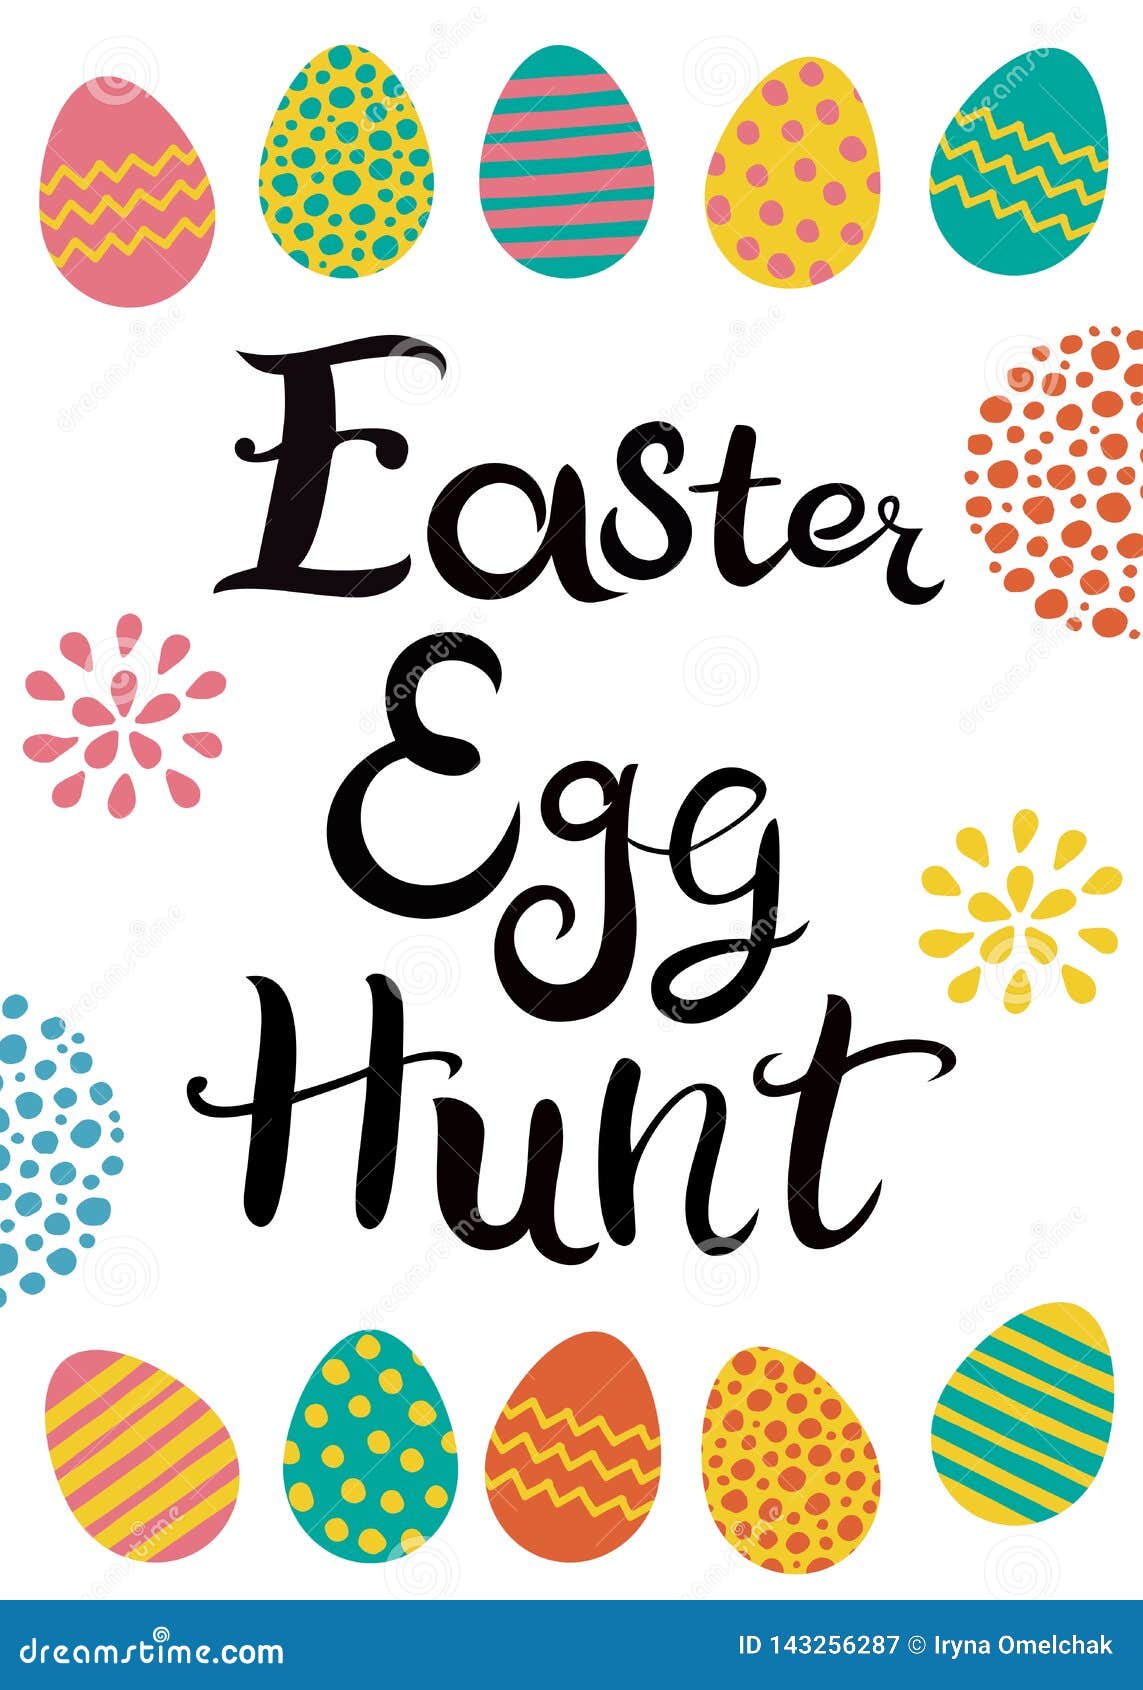 hand drawn lettering. easter egg hunt. easter eggs with different hand drawn ornaments.